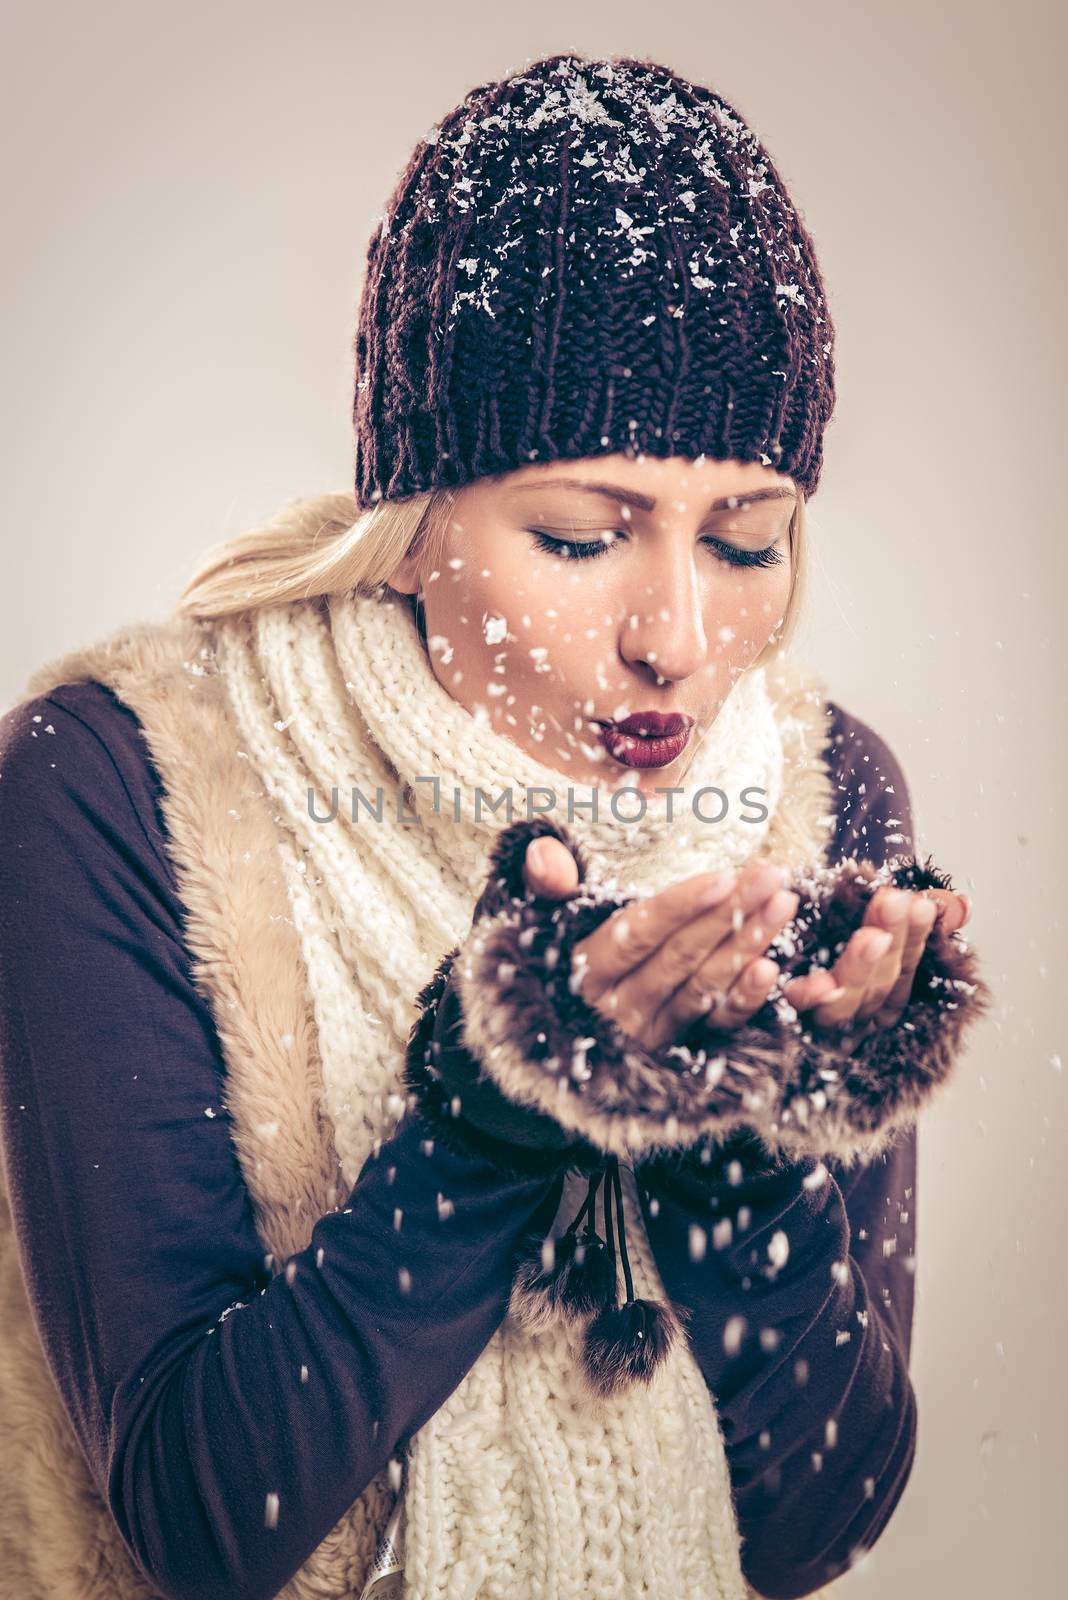 Cute Girl Blowing Snowflakes by MilanMarkovic78